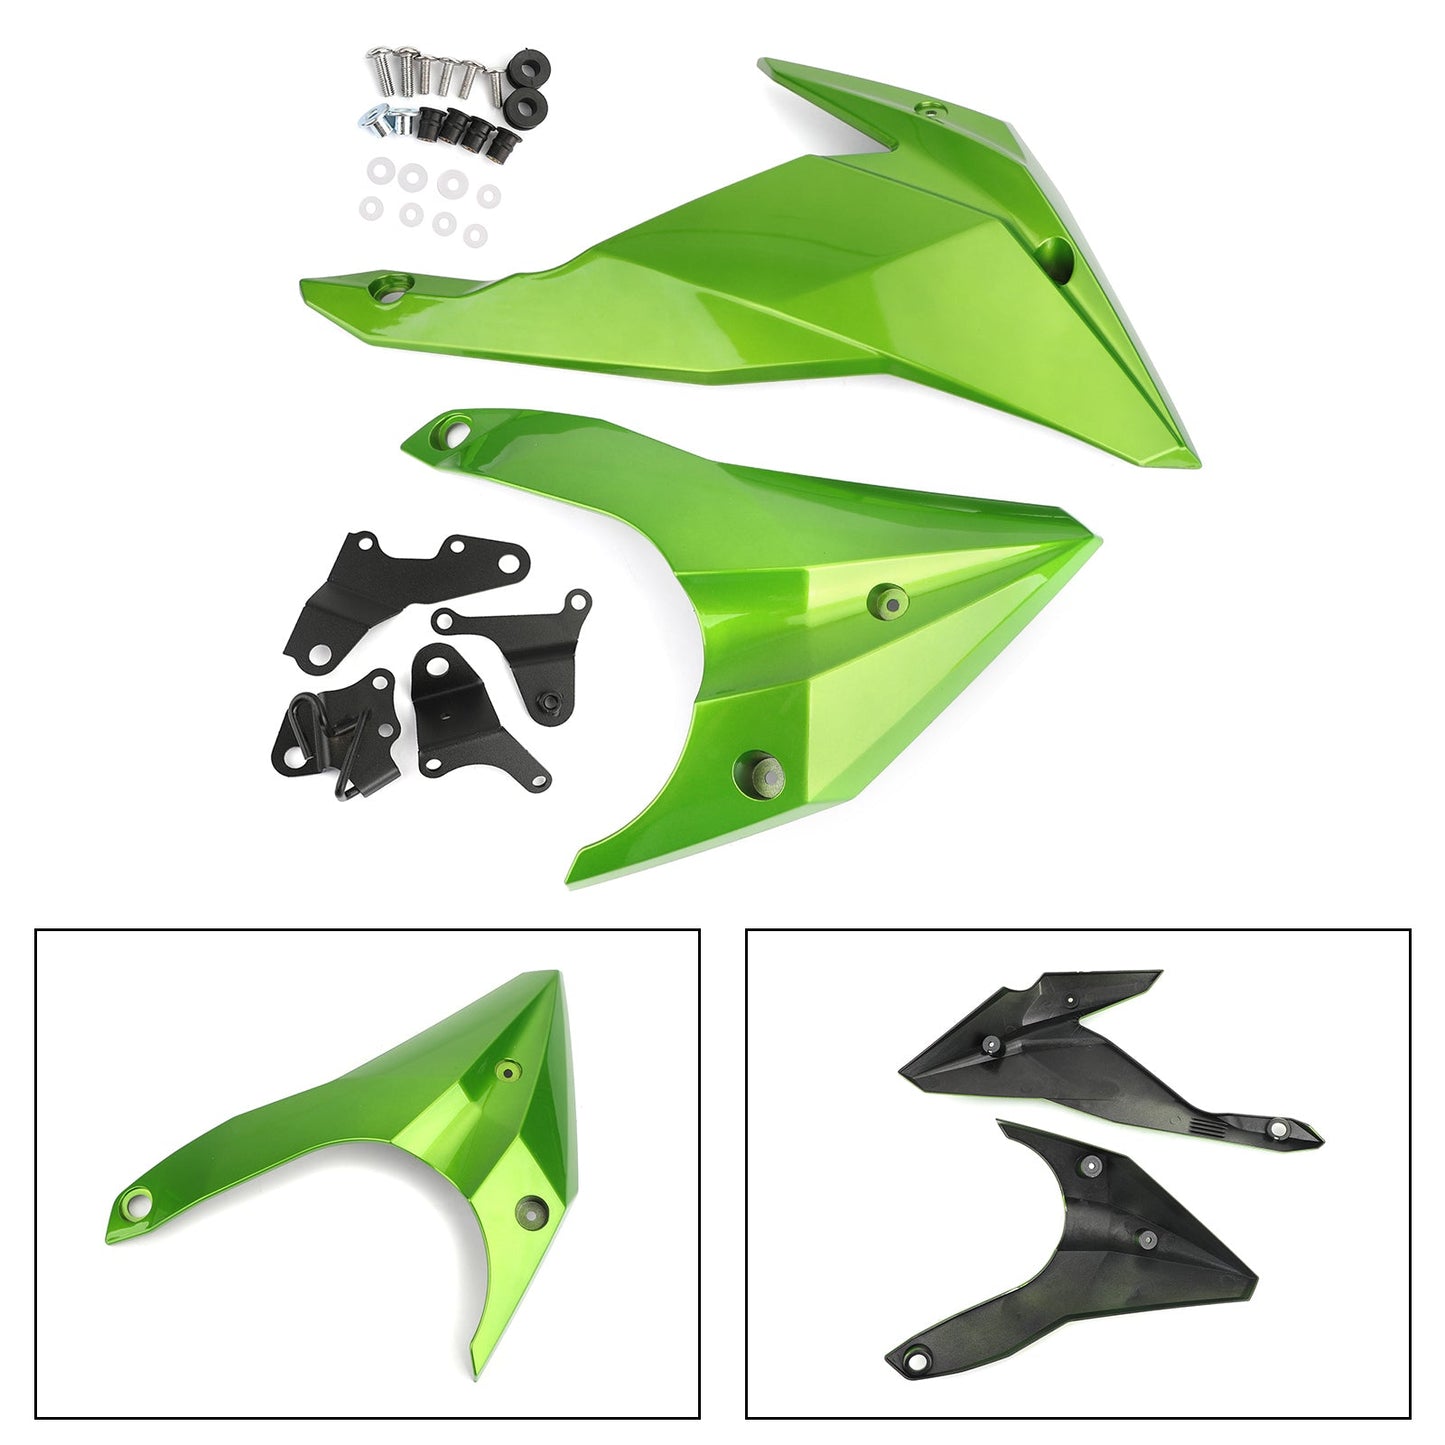 Engine Panel Belly Pan Lower Cowling Cover Fairing for Kawasaki Z400 2018-2020